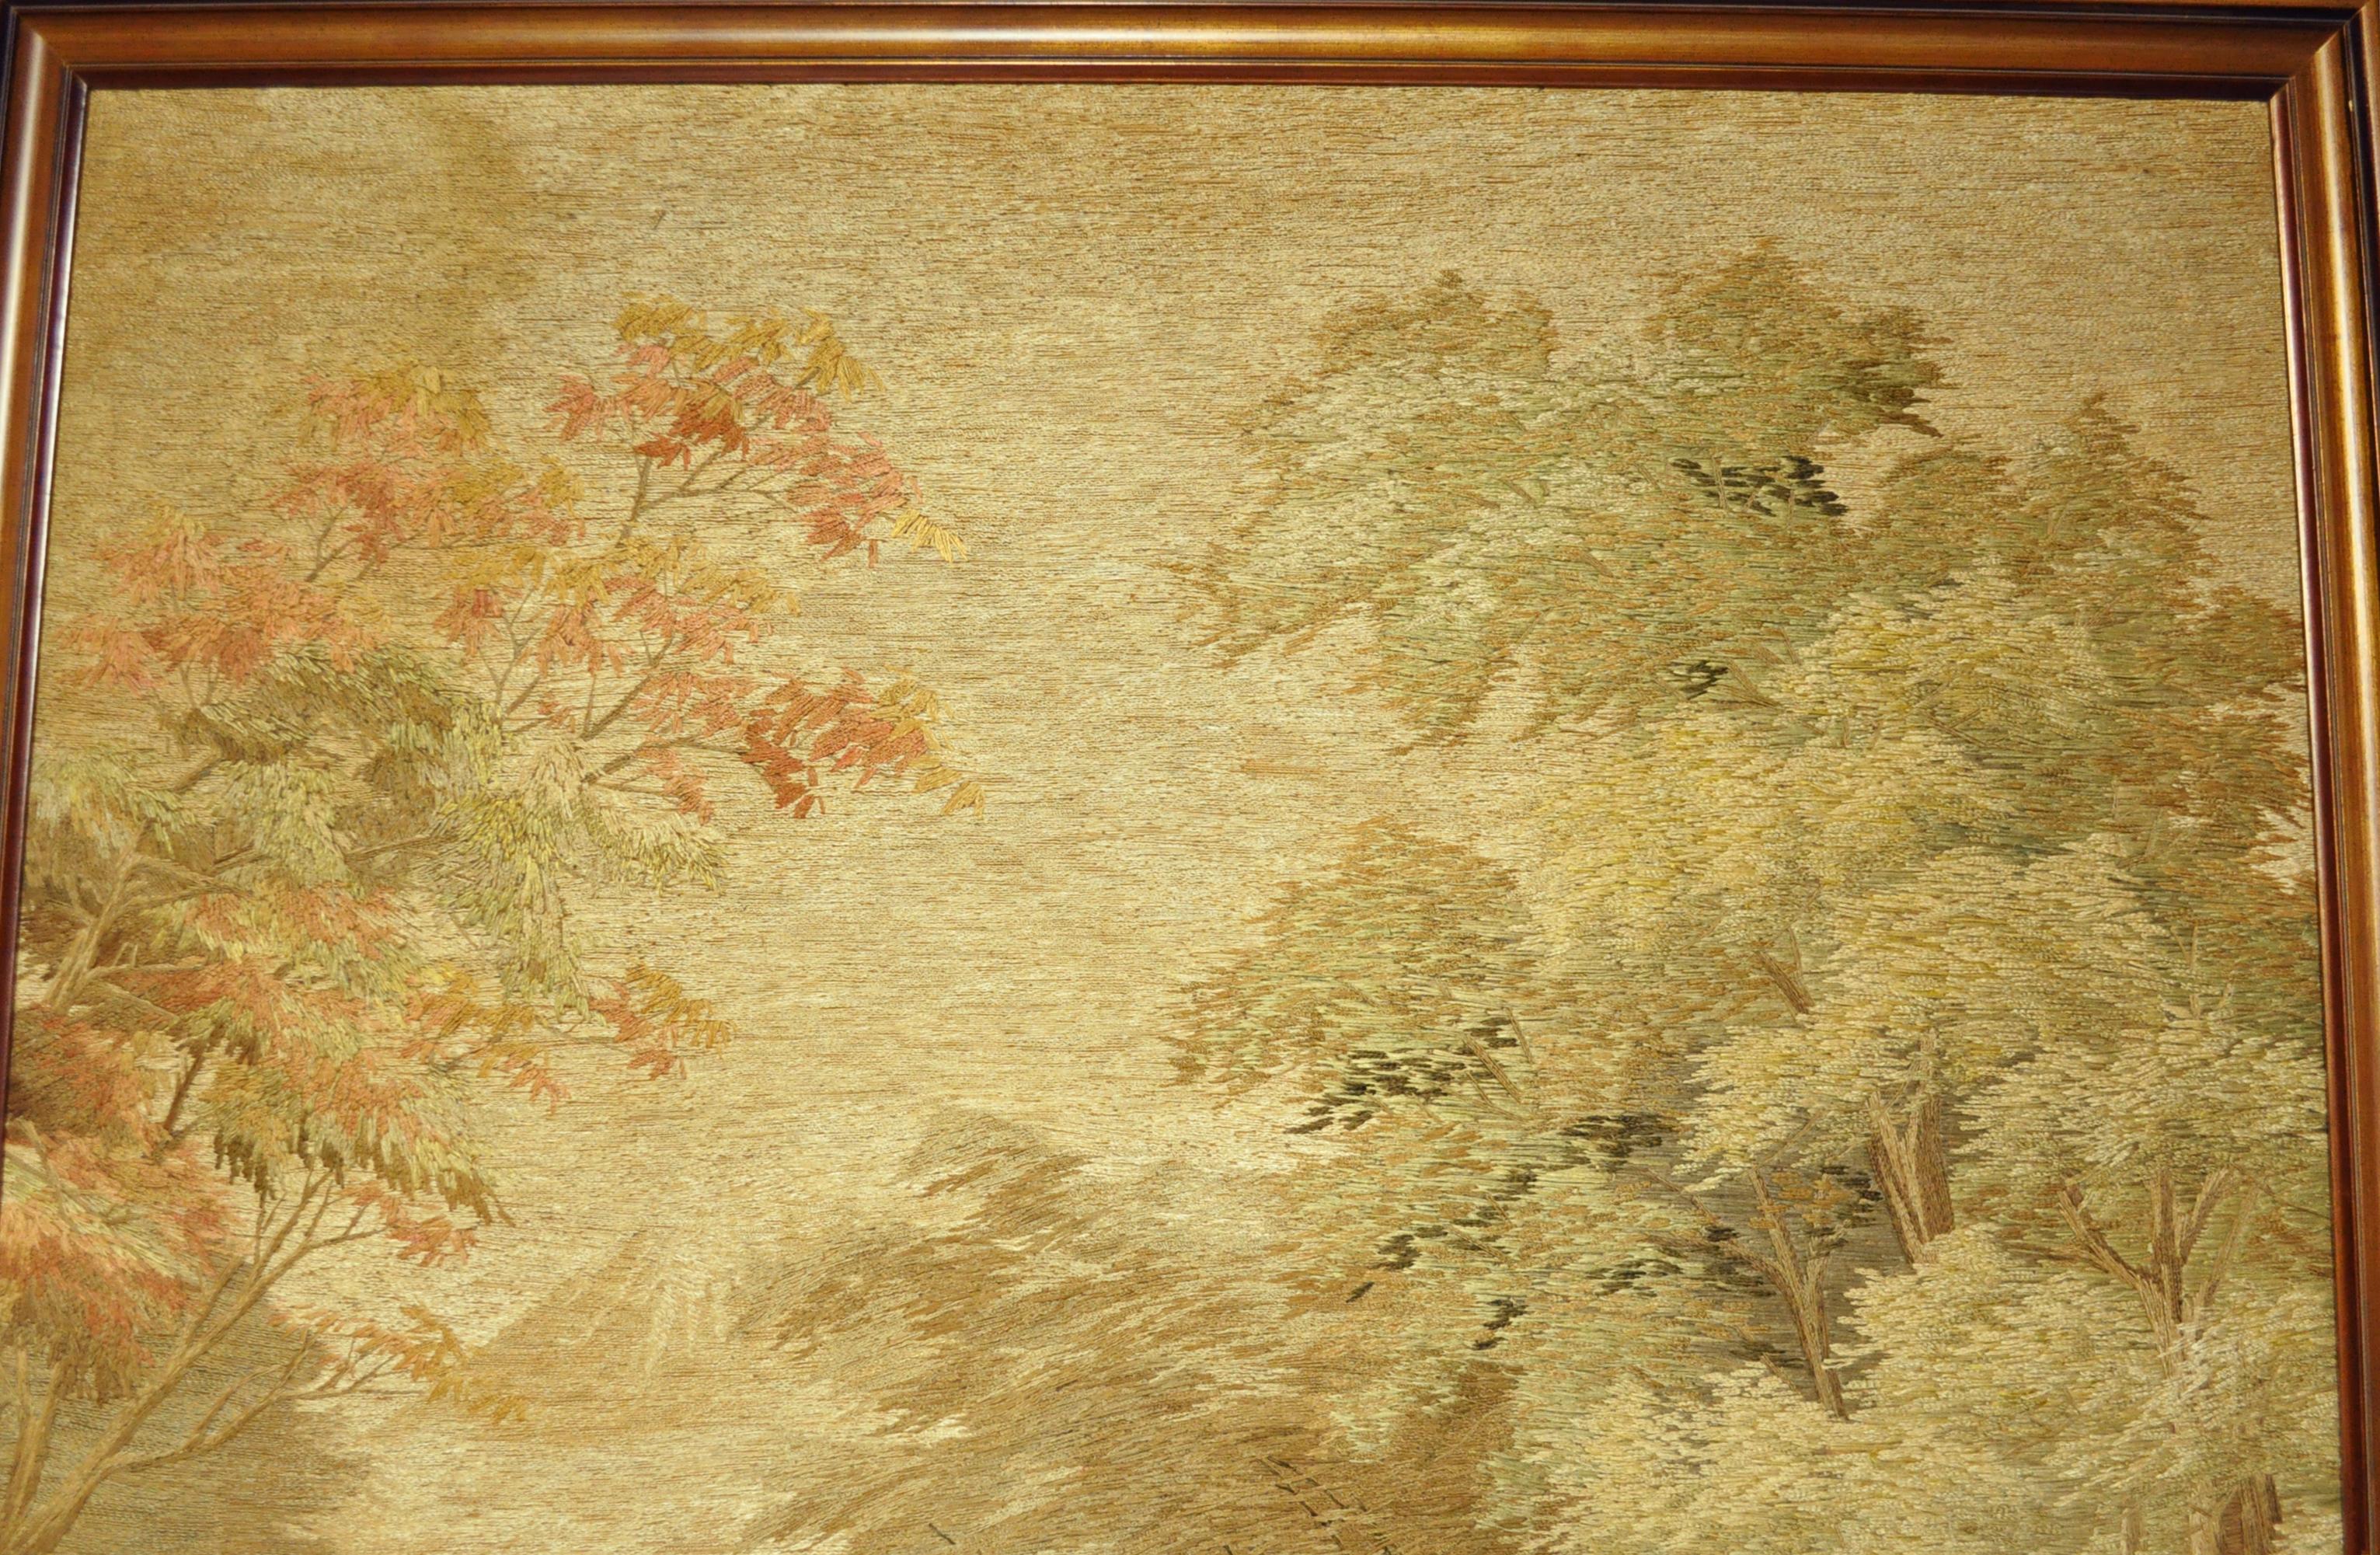 Extraordinary Antique Japanese Embroidered Tapestry In Good Condition For Sale In West Palm Beach, FL